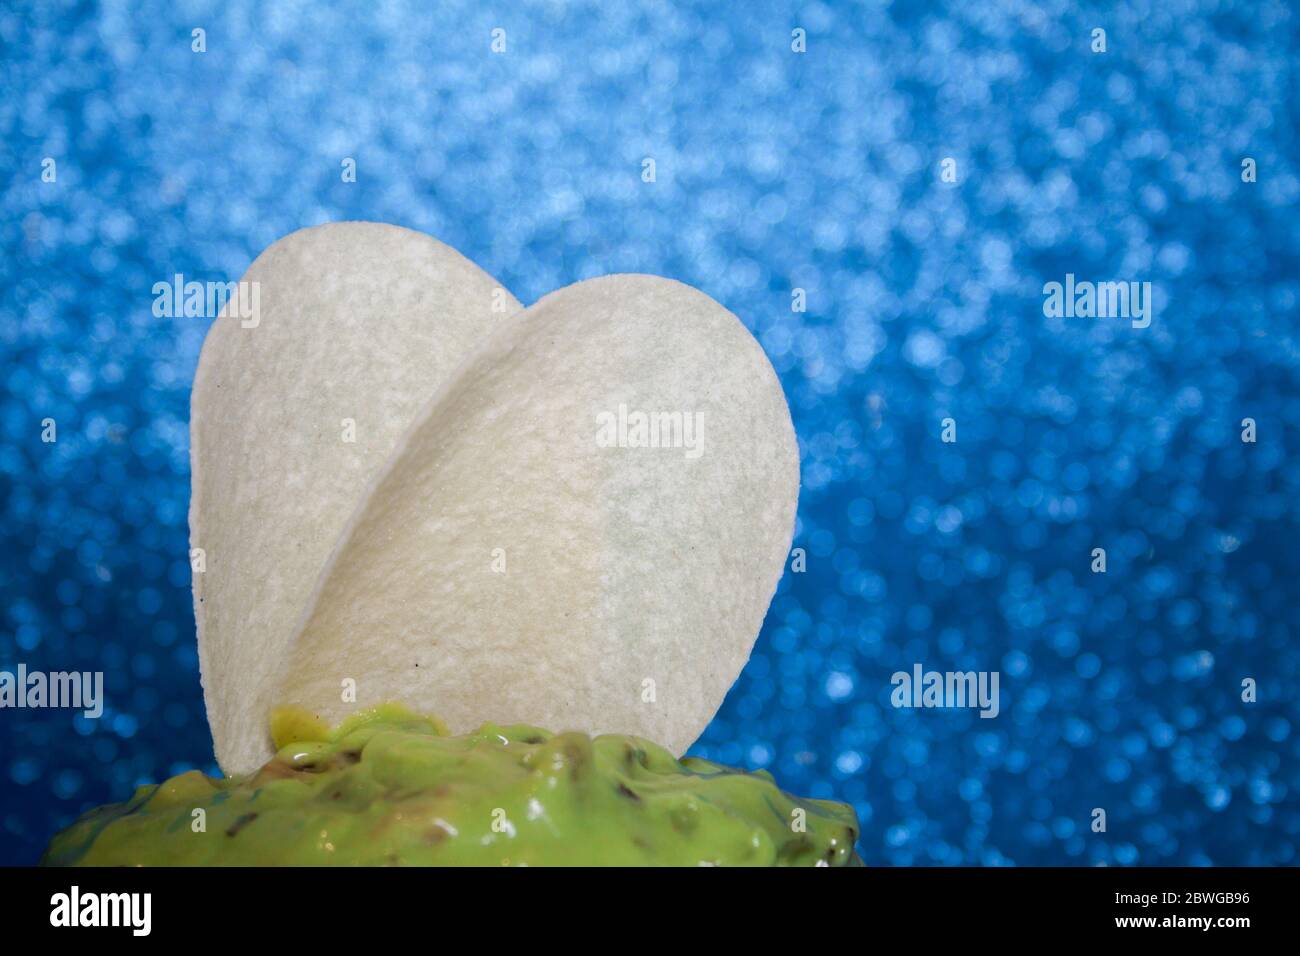 Potato chips with guacamole sauce with green avocado on a blue background. Stock Photo